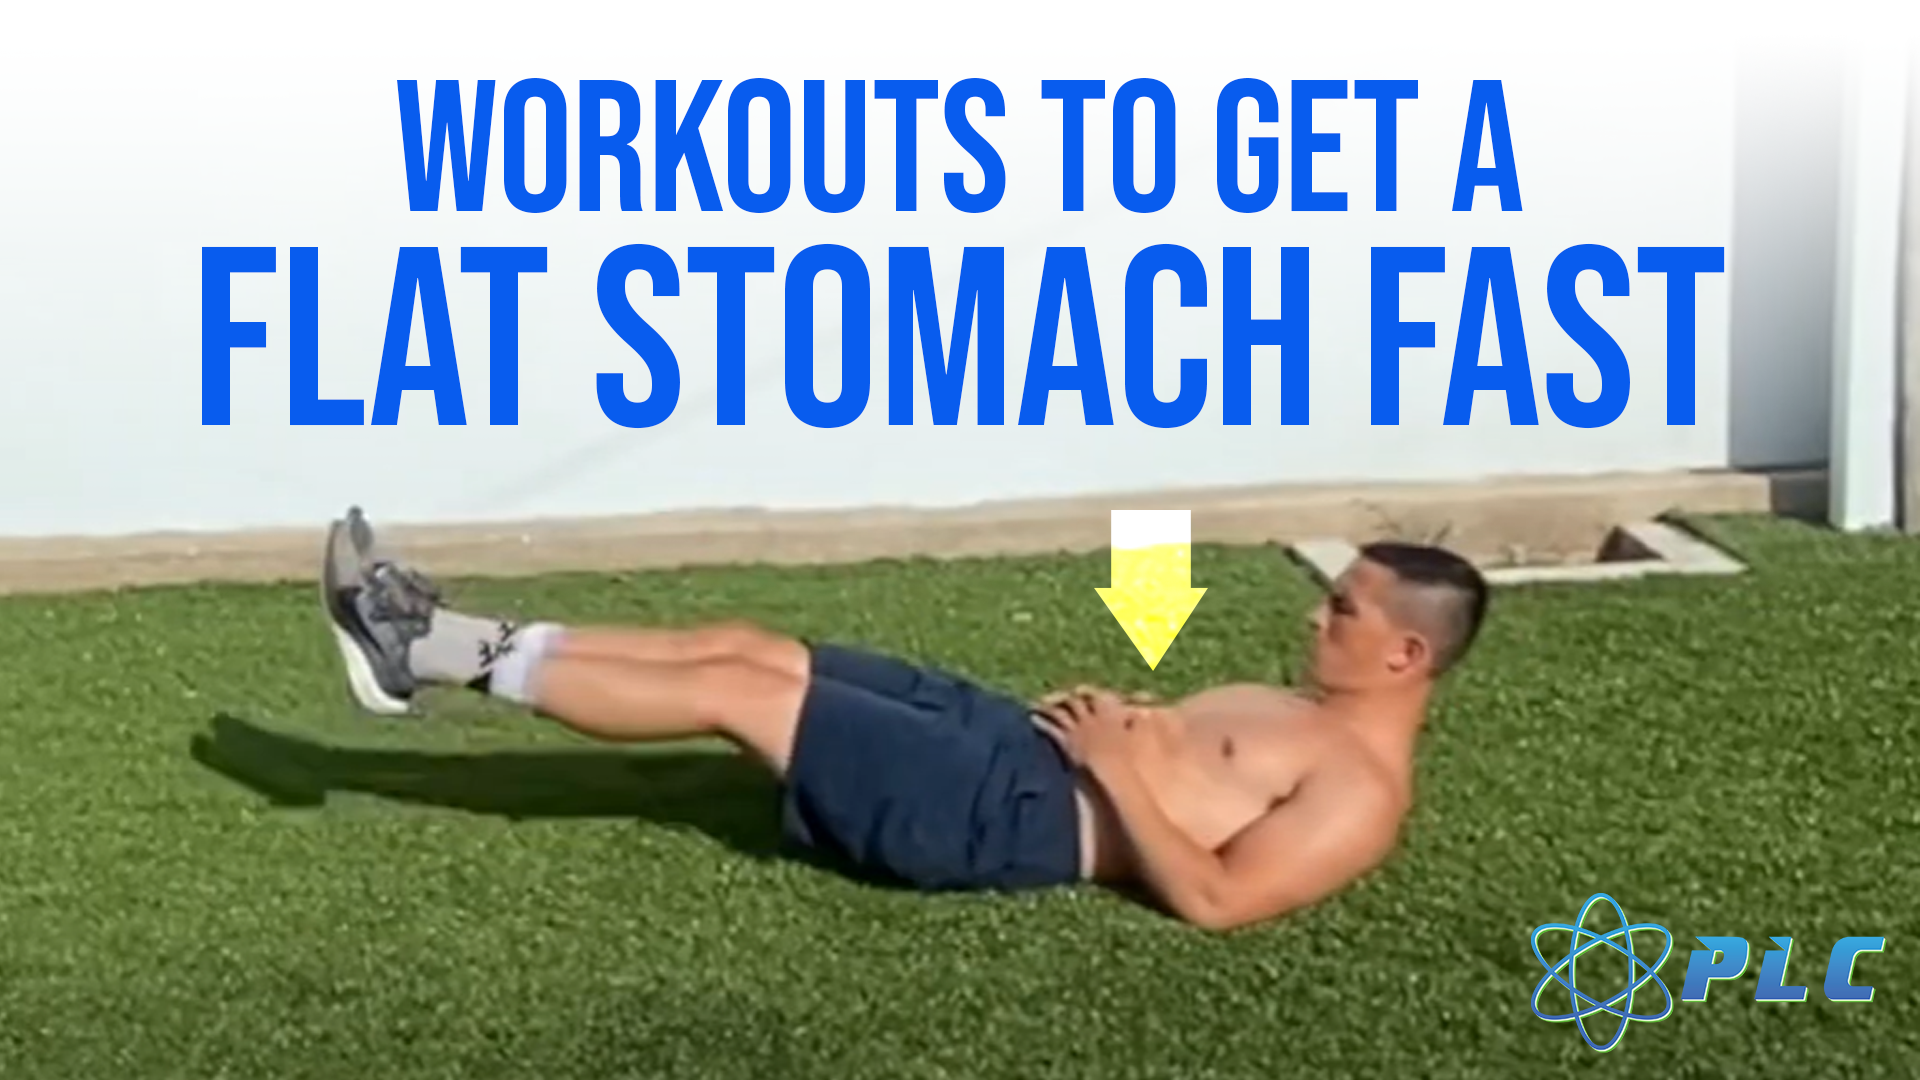 Workouts to Get a Flat Stomach Fast